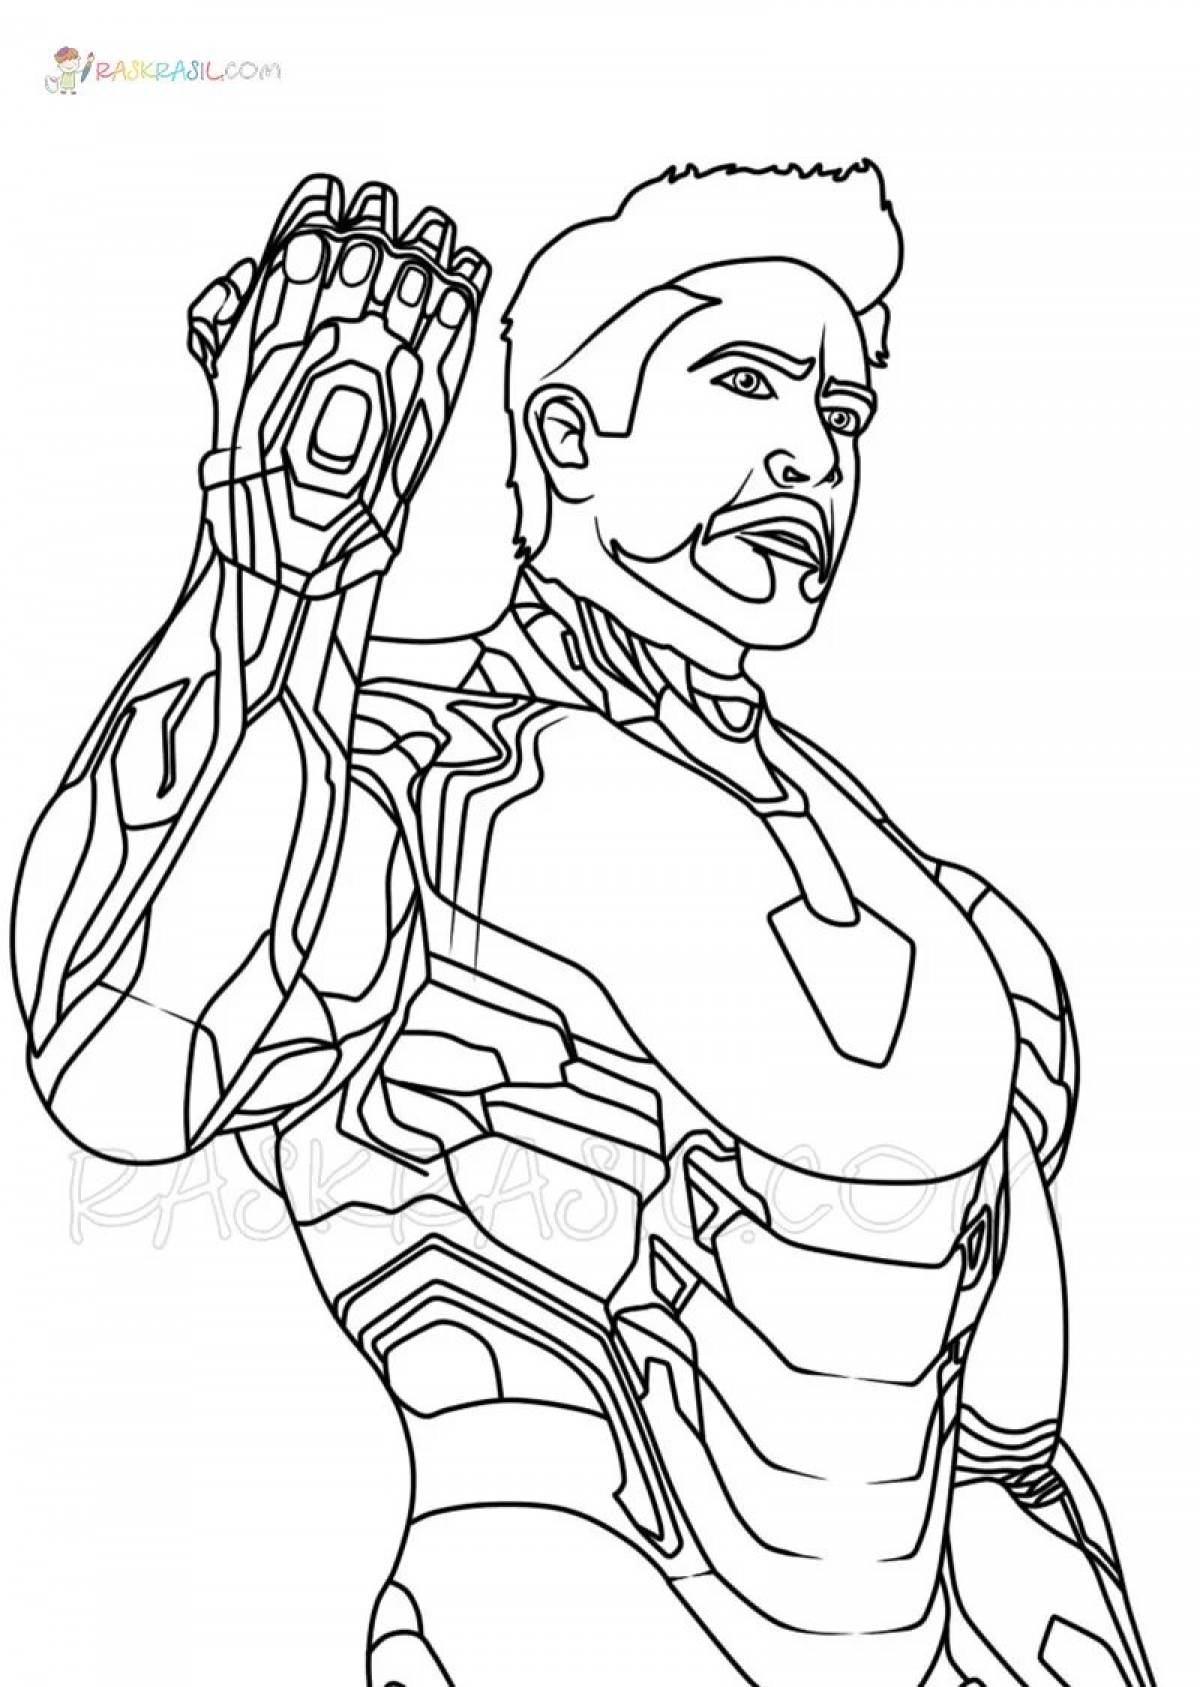 Marvelous iron man coloring page